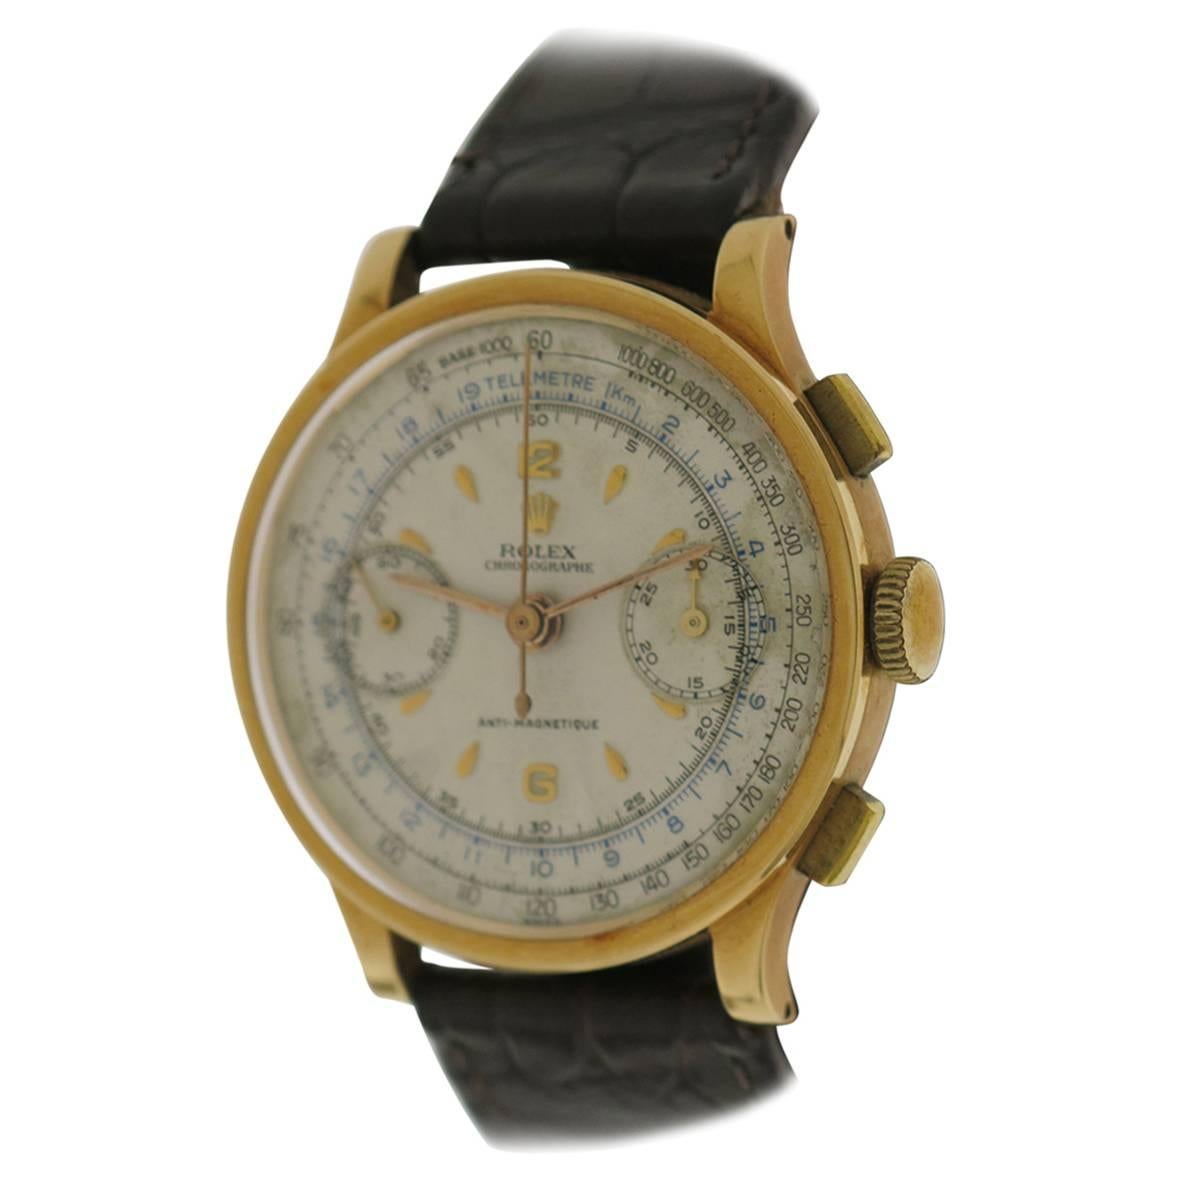 Rolex Yellow Gold White Dial Chronograph Wristwatch Ref 2508 For Sale